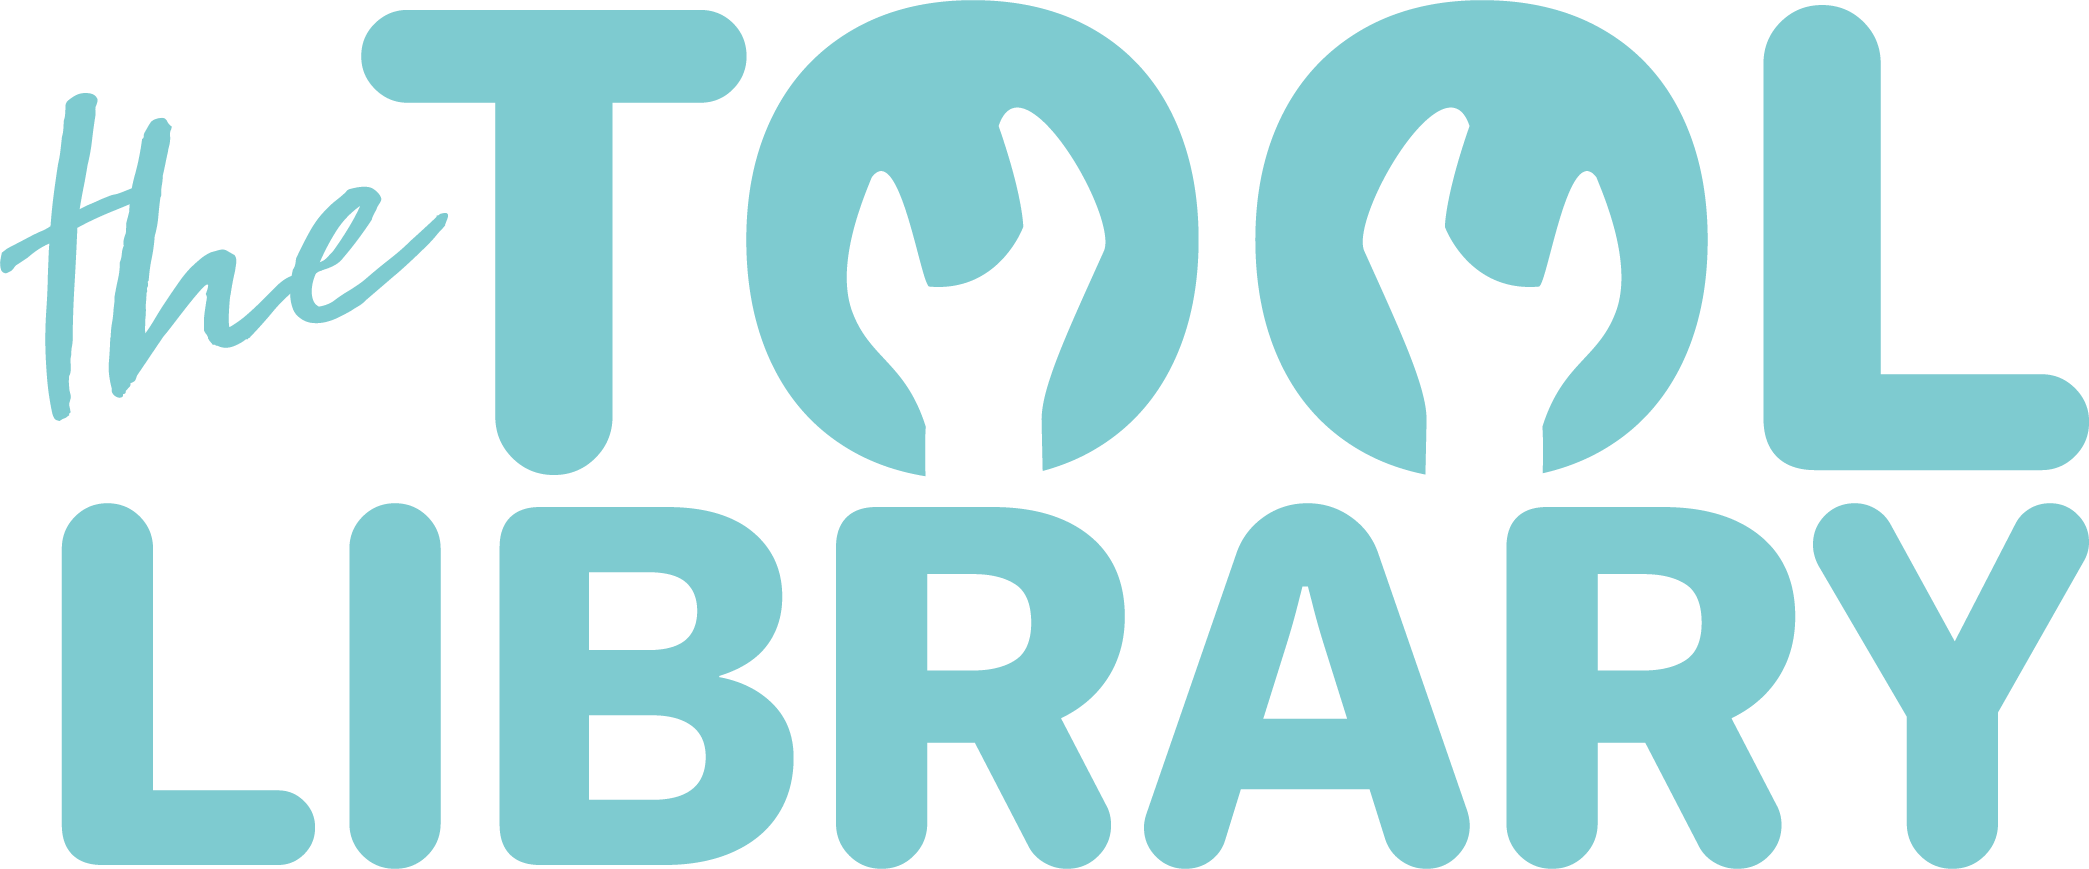 Turquoise blue logo of The Tool Library